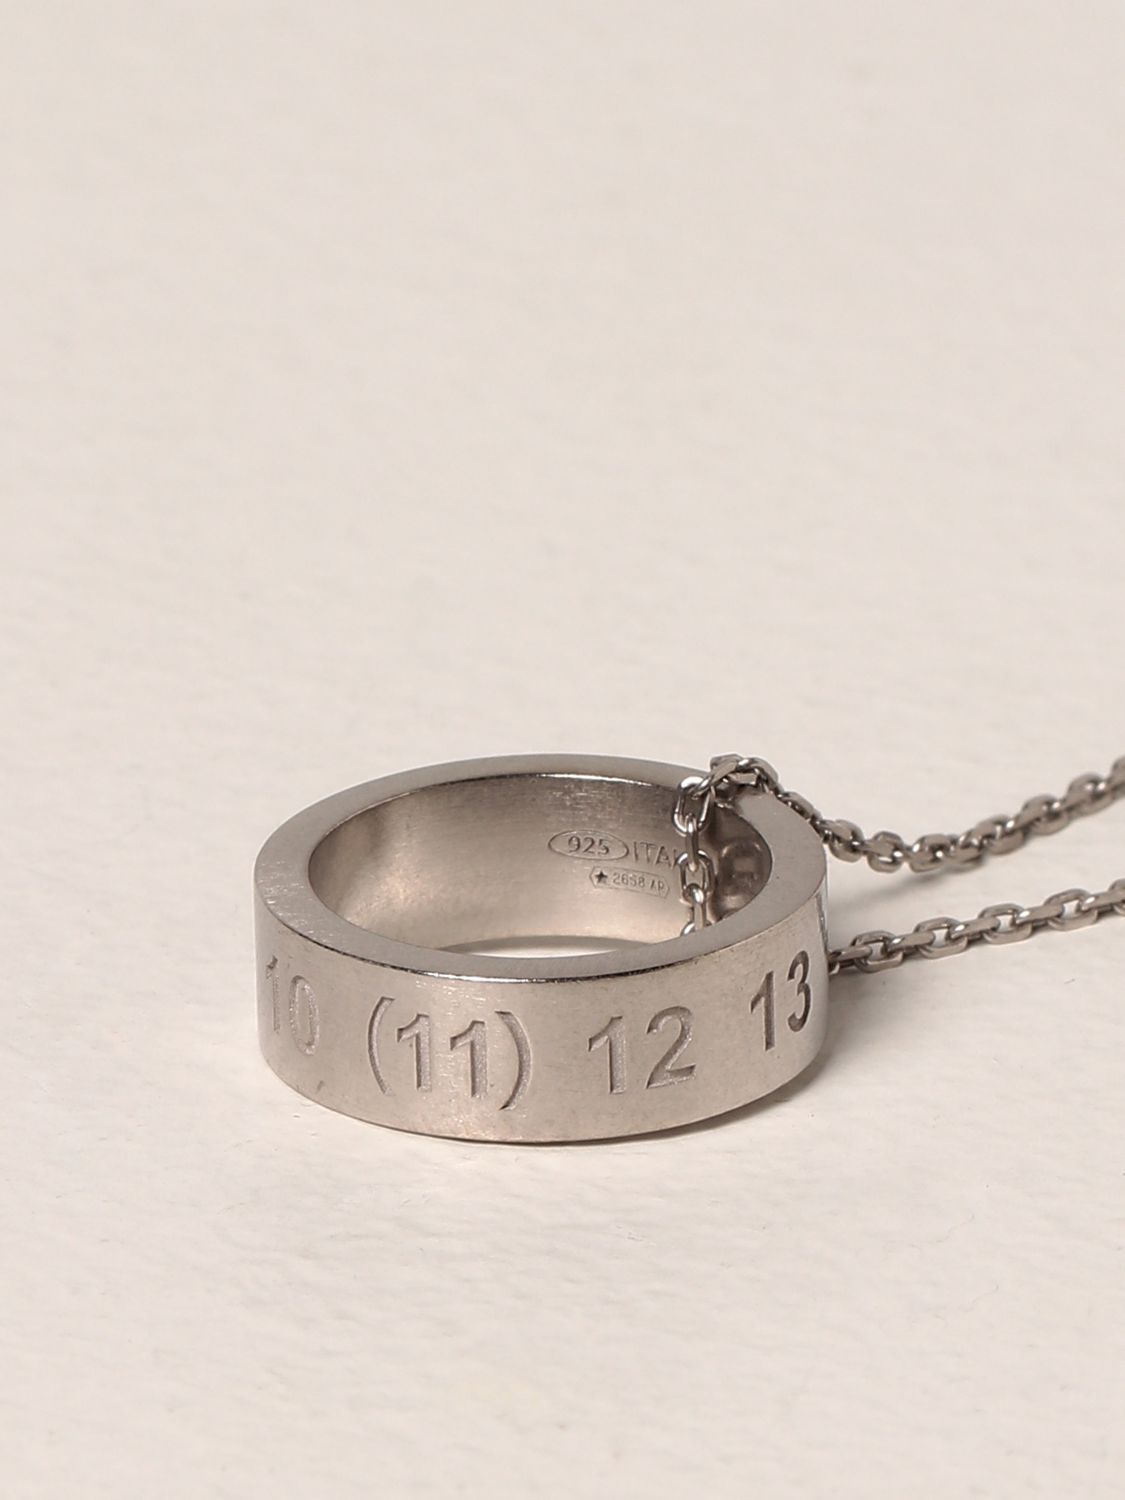 Maison Margiela 925 silver necklace with ring